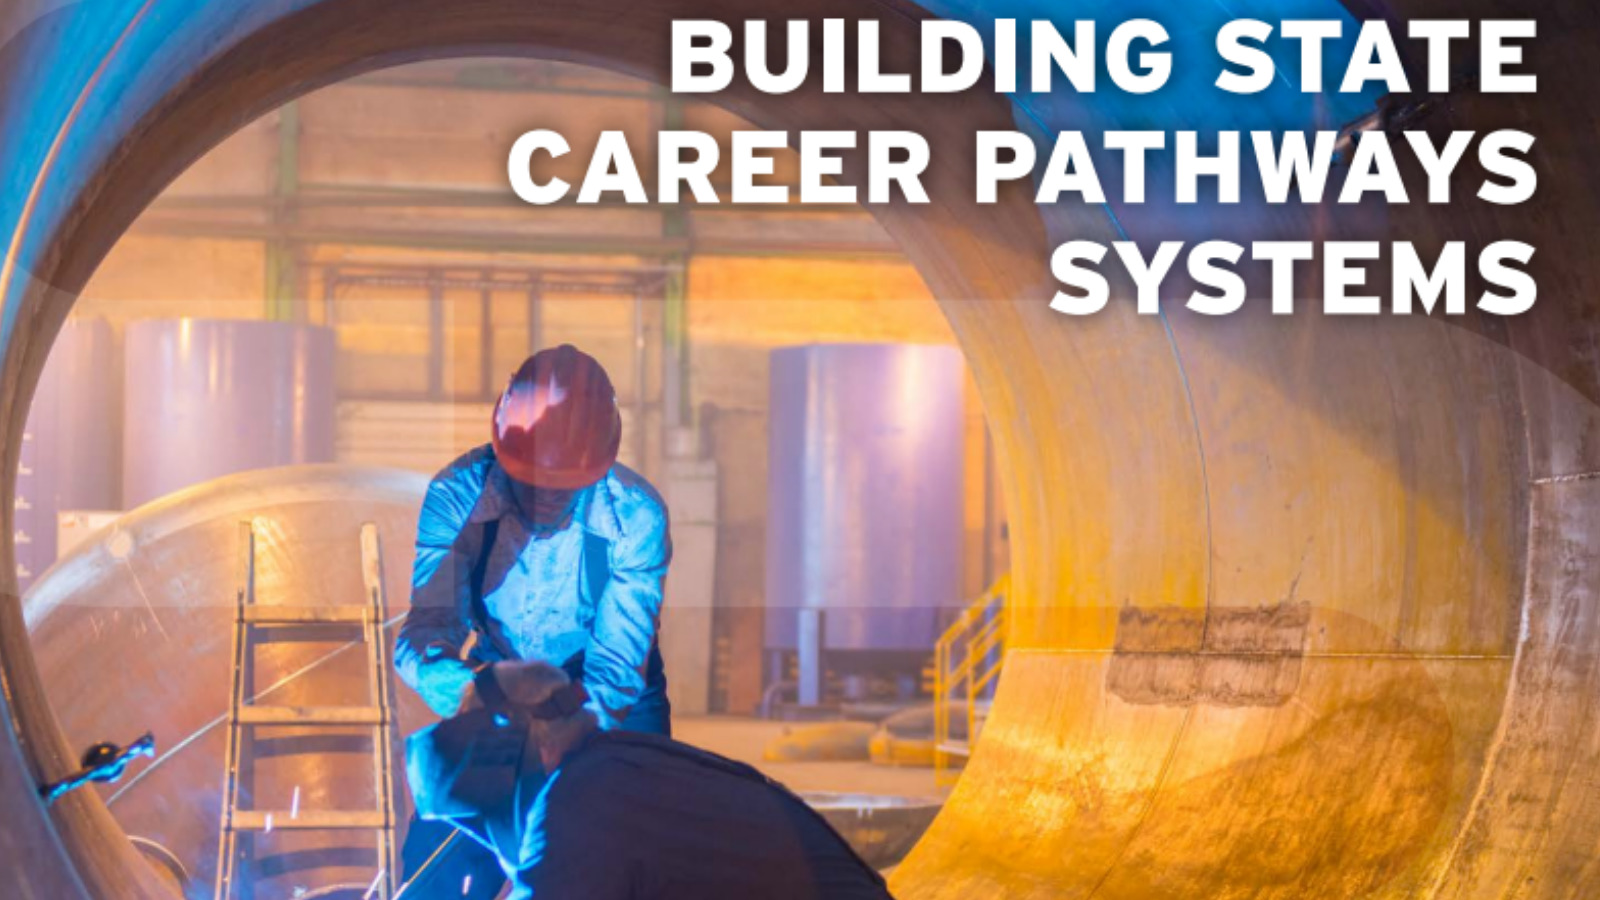 Building State Career Pathways Systems